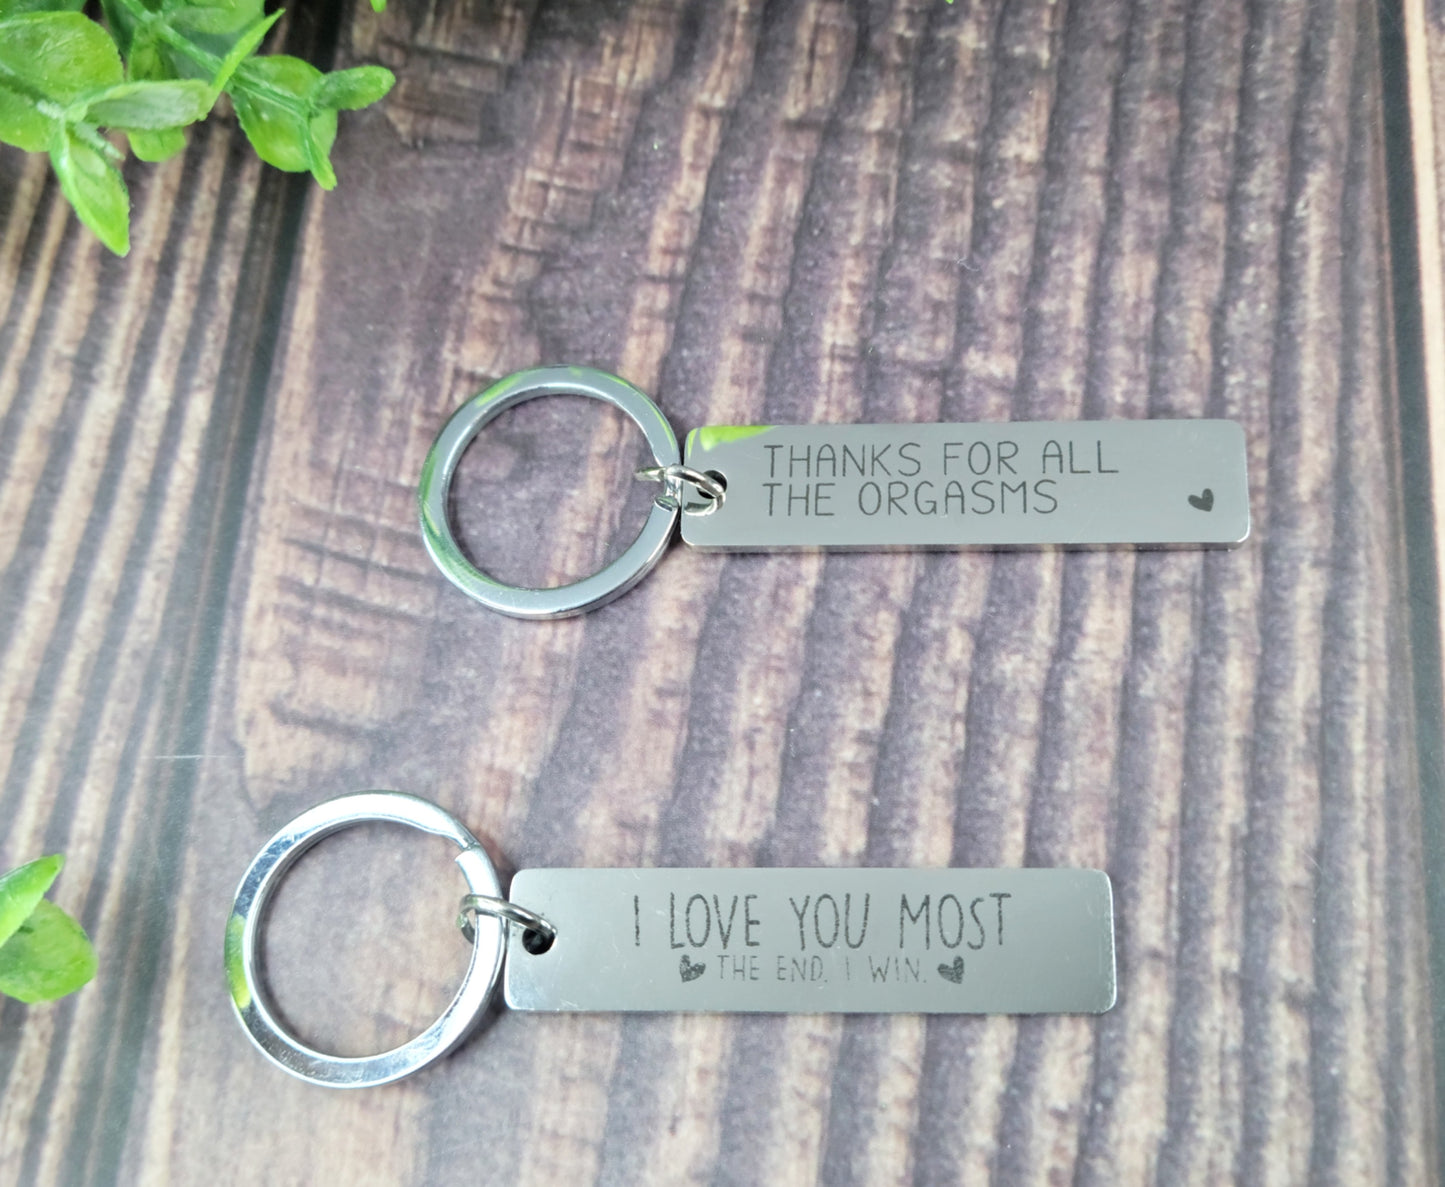 Stainless Steel keychain laser engraving blank, silver keychain blank for engraving, stainless steel key chain RTS